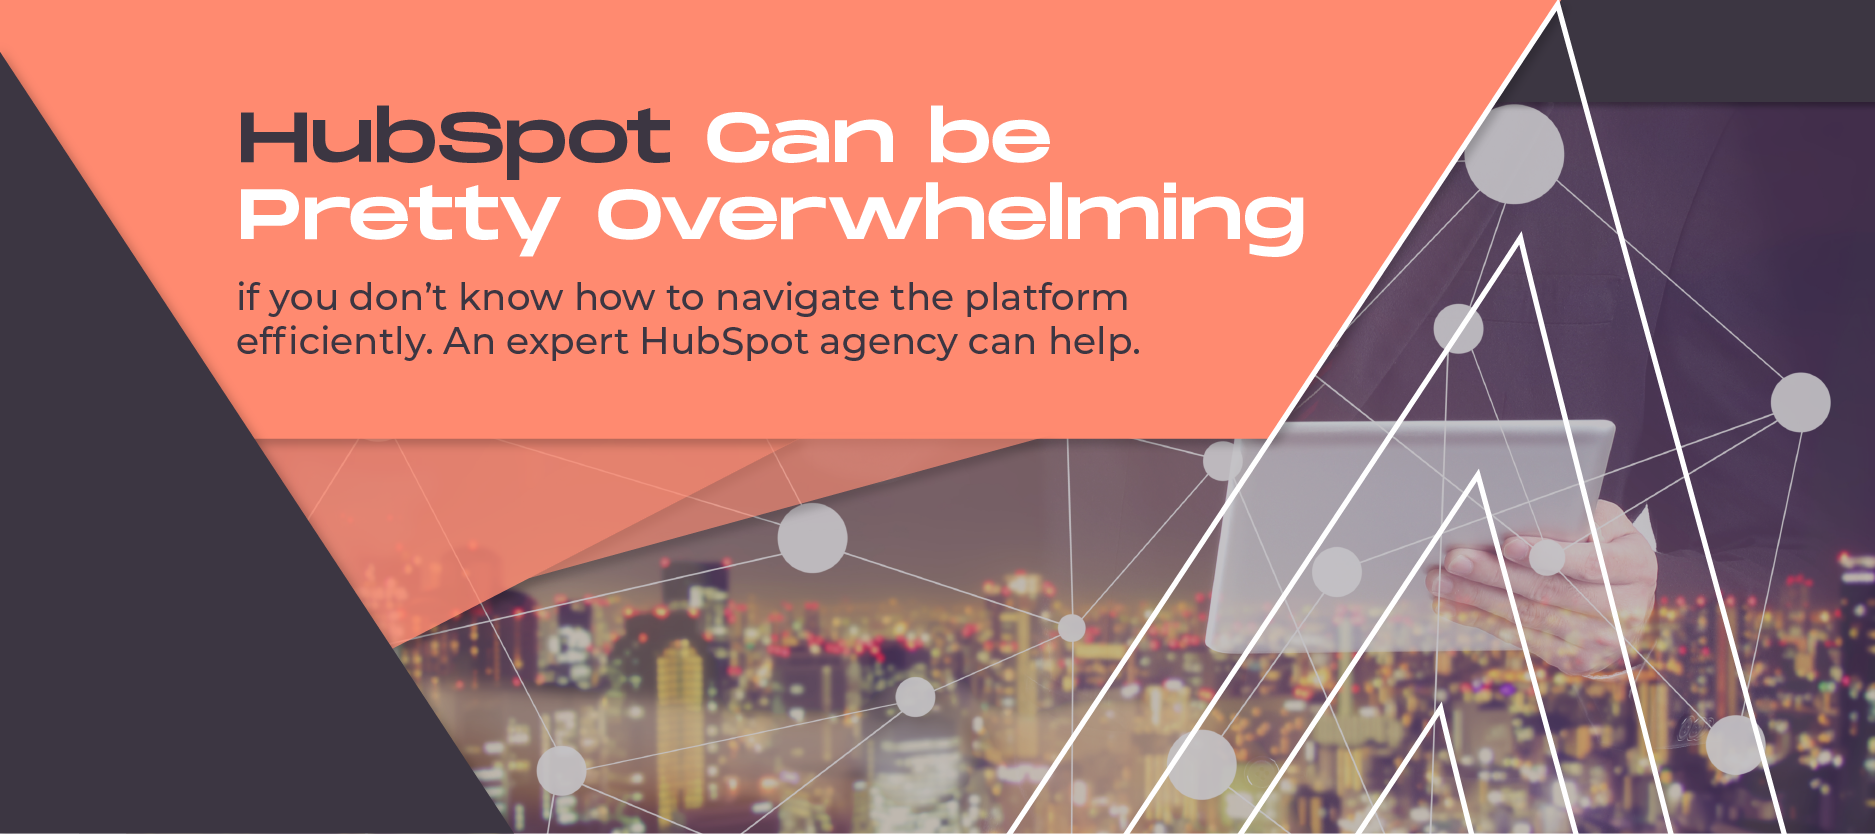 HubSpot can be pretty overwhelming if you don’t know how to navigate the platform efficiently. An expert HubSpot agency can help.